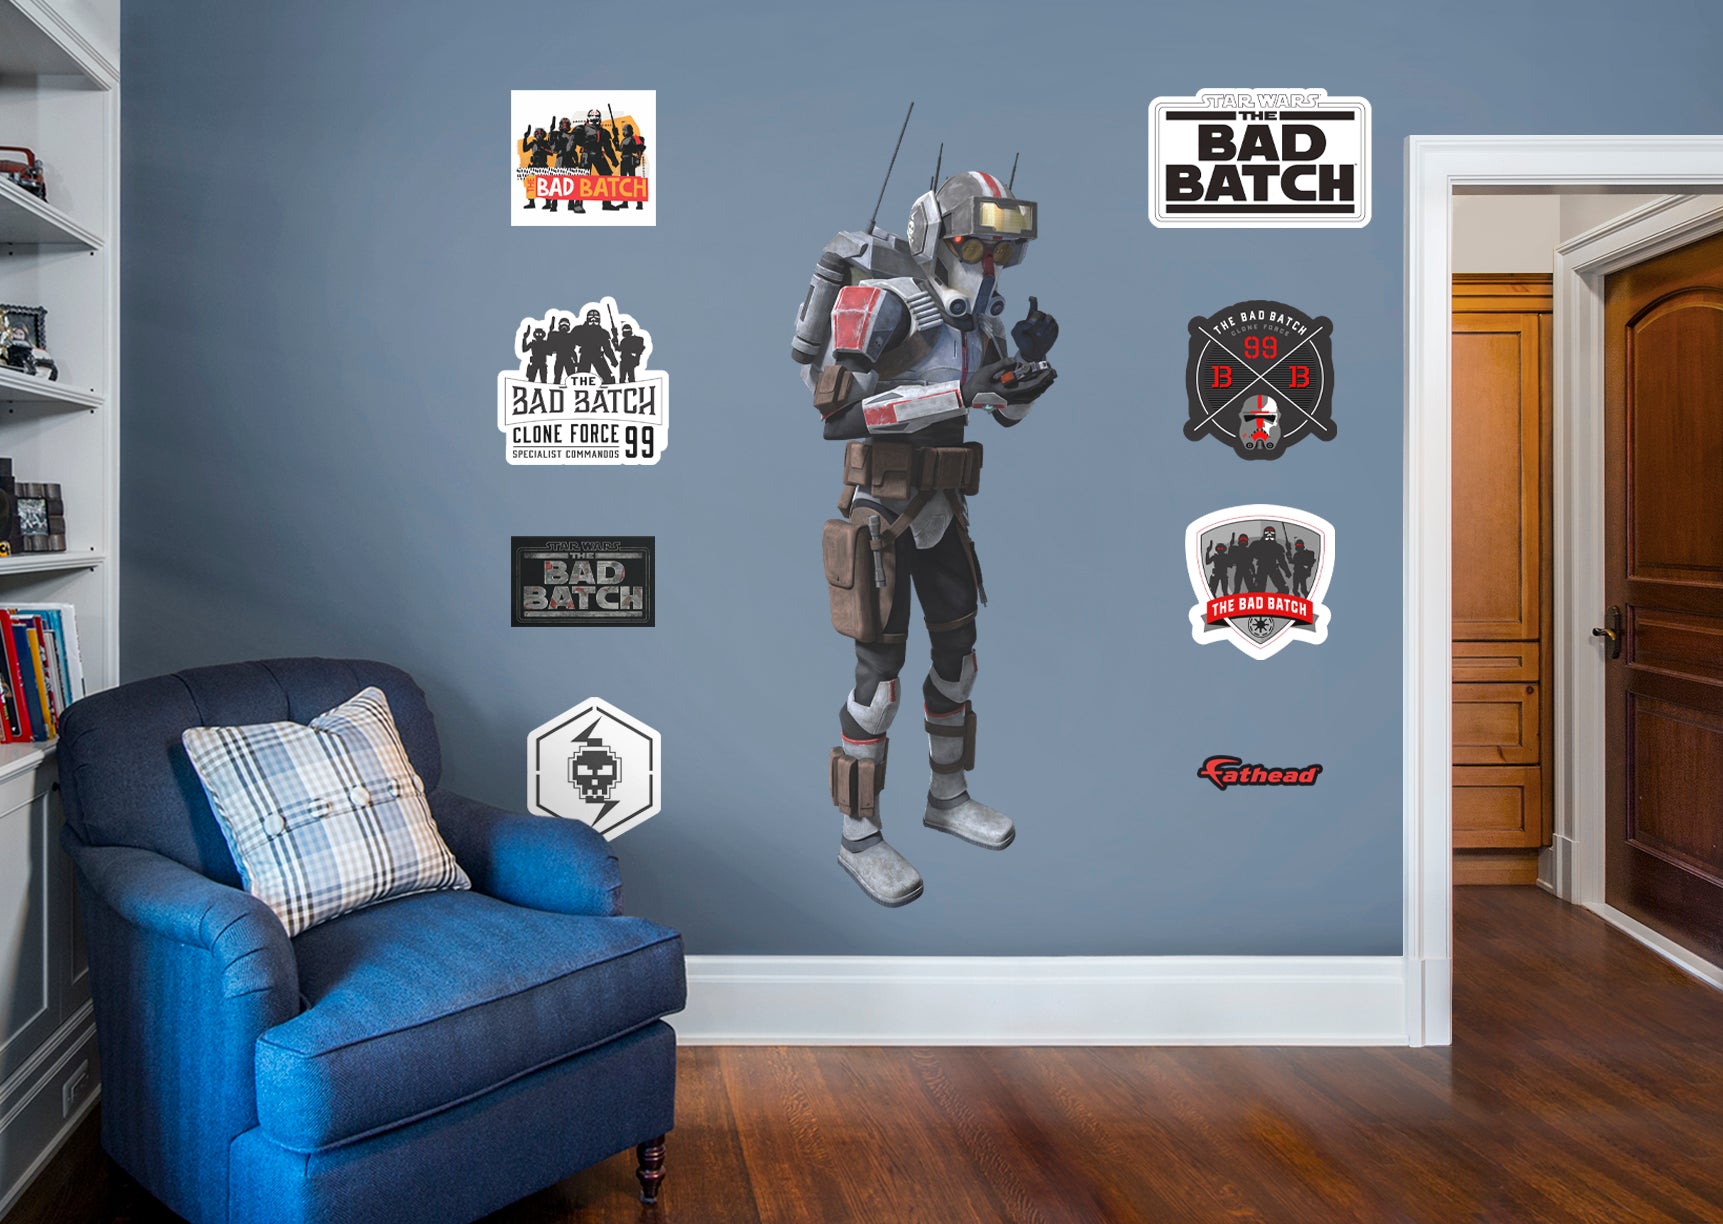 Bad Batch Tech - Officially Licensed Star Wars Removable Wall Decal Life-Size Character + 2 Decals by Fathead | Vinyl